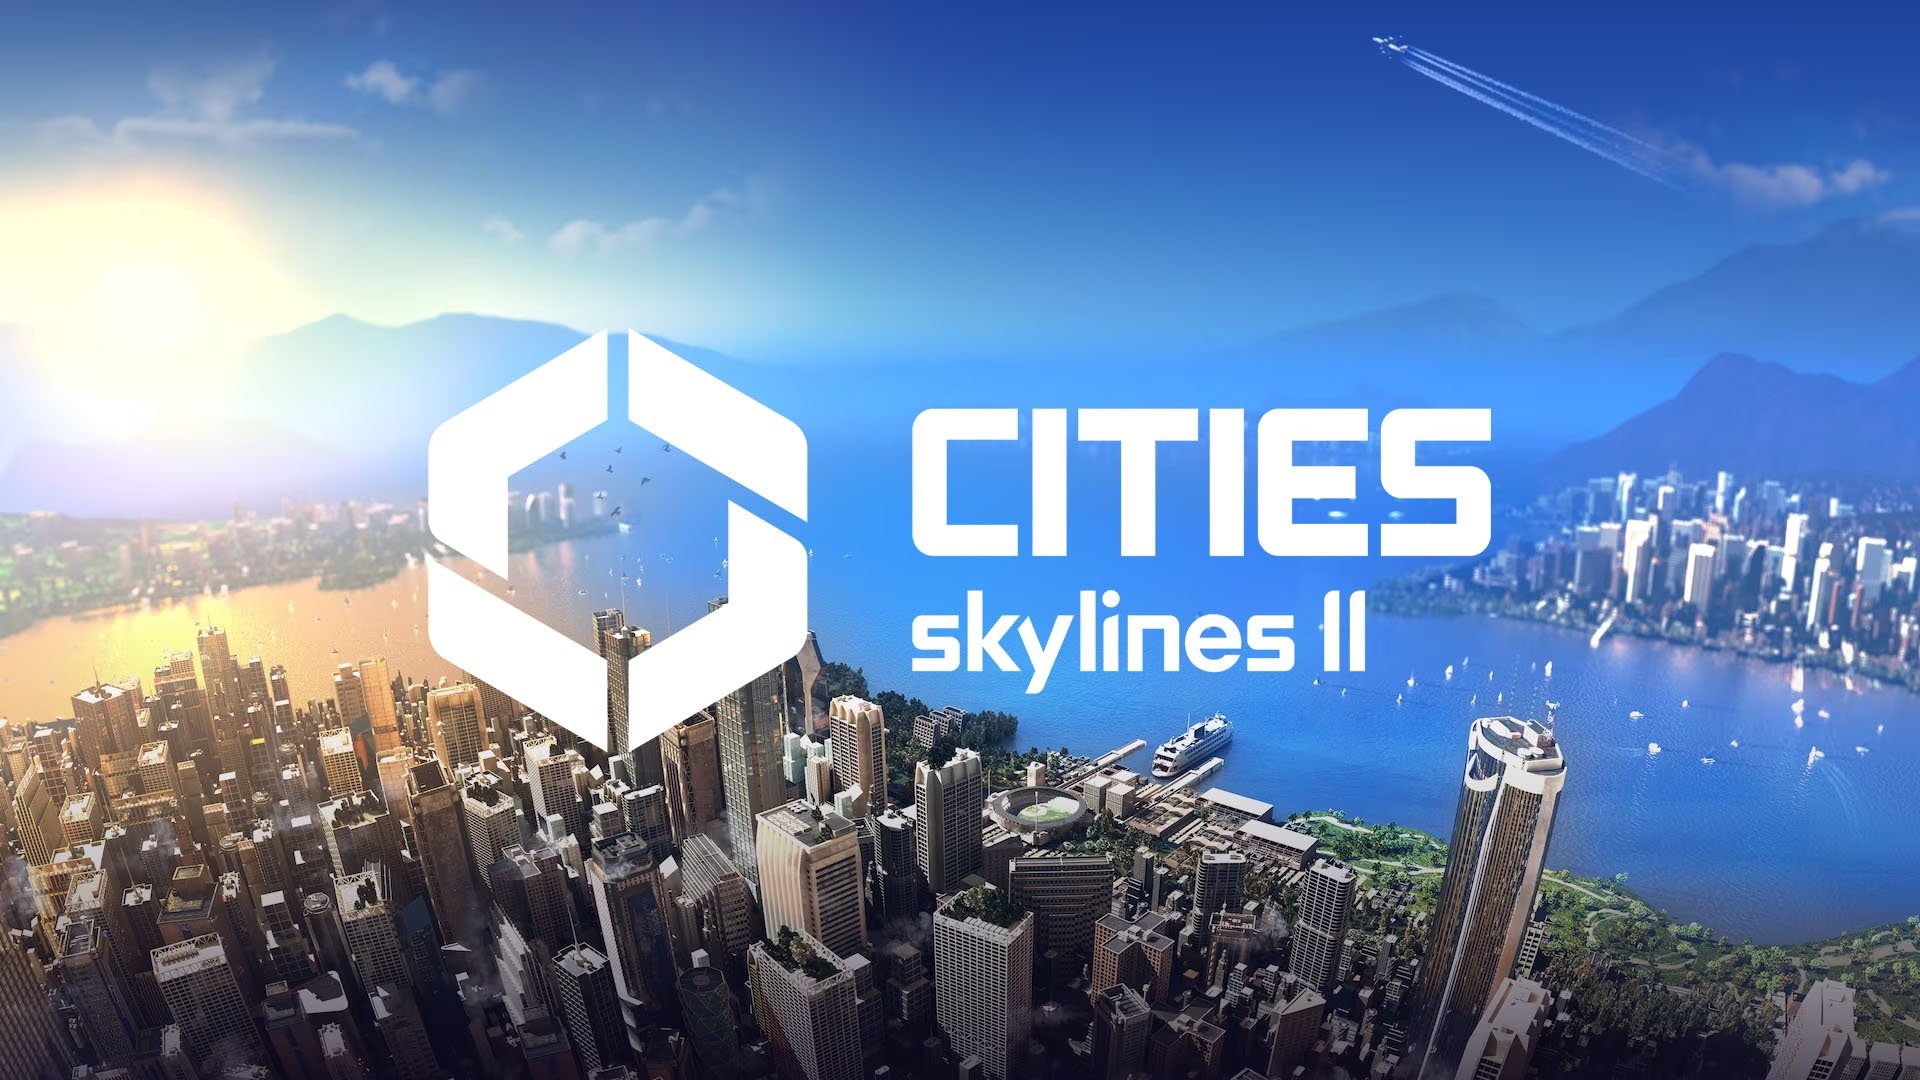 Colossal Orders hikes Cities Skylines 2’s system requirements to ensure a better gameplay experience